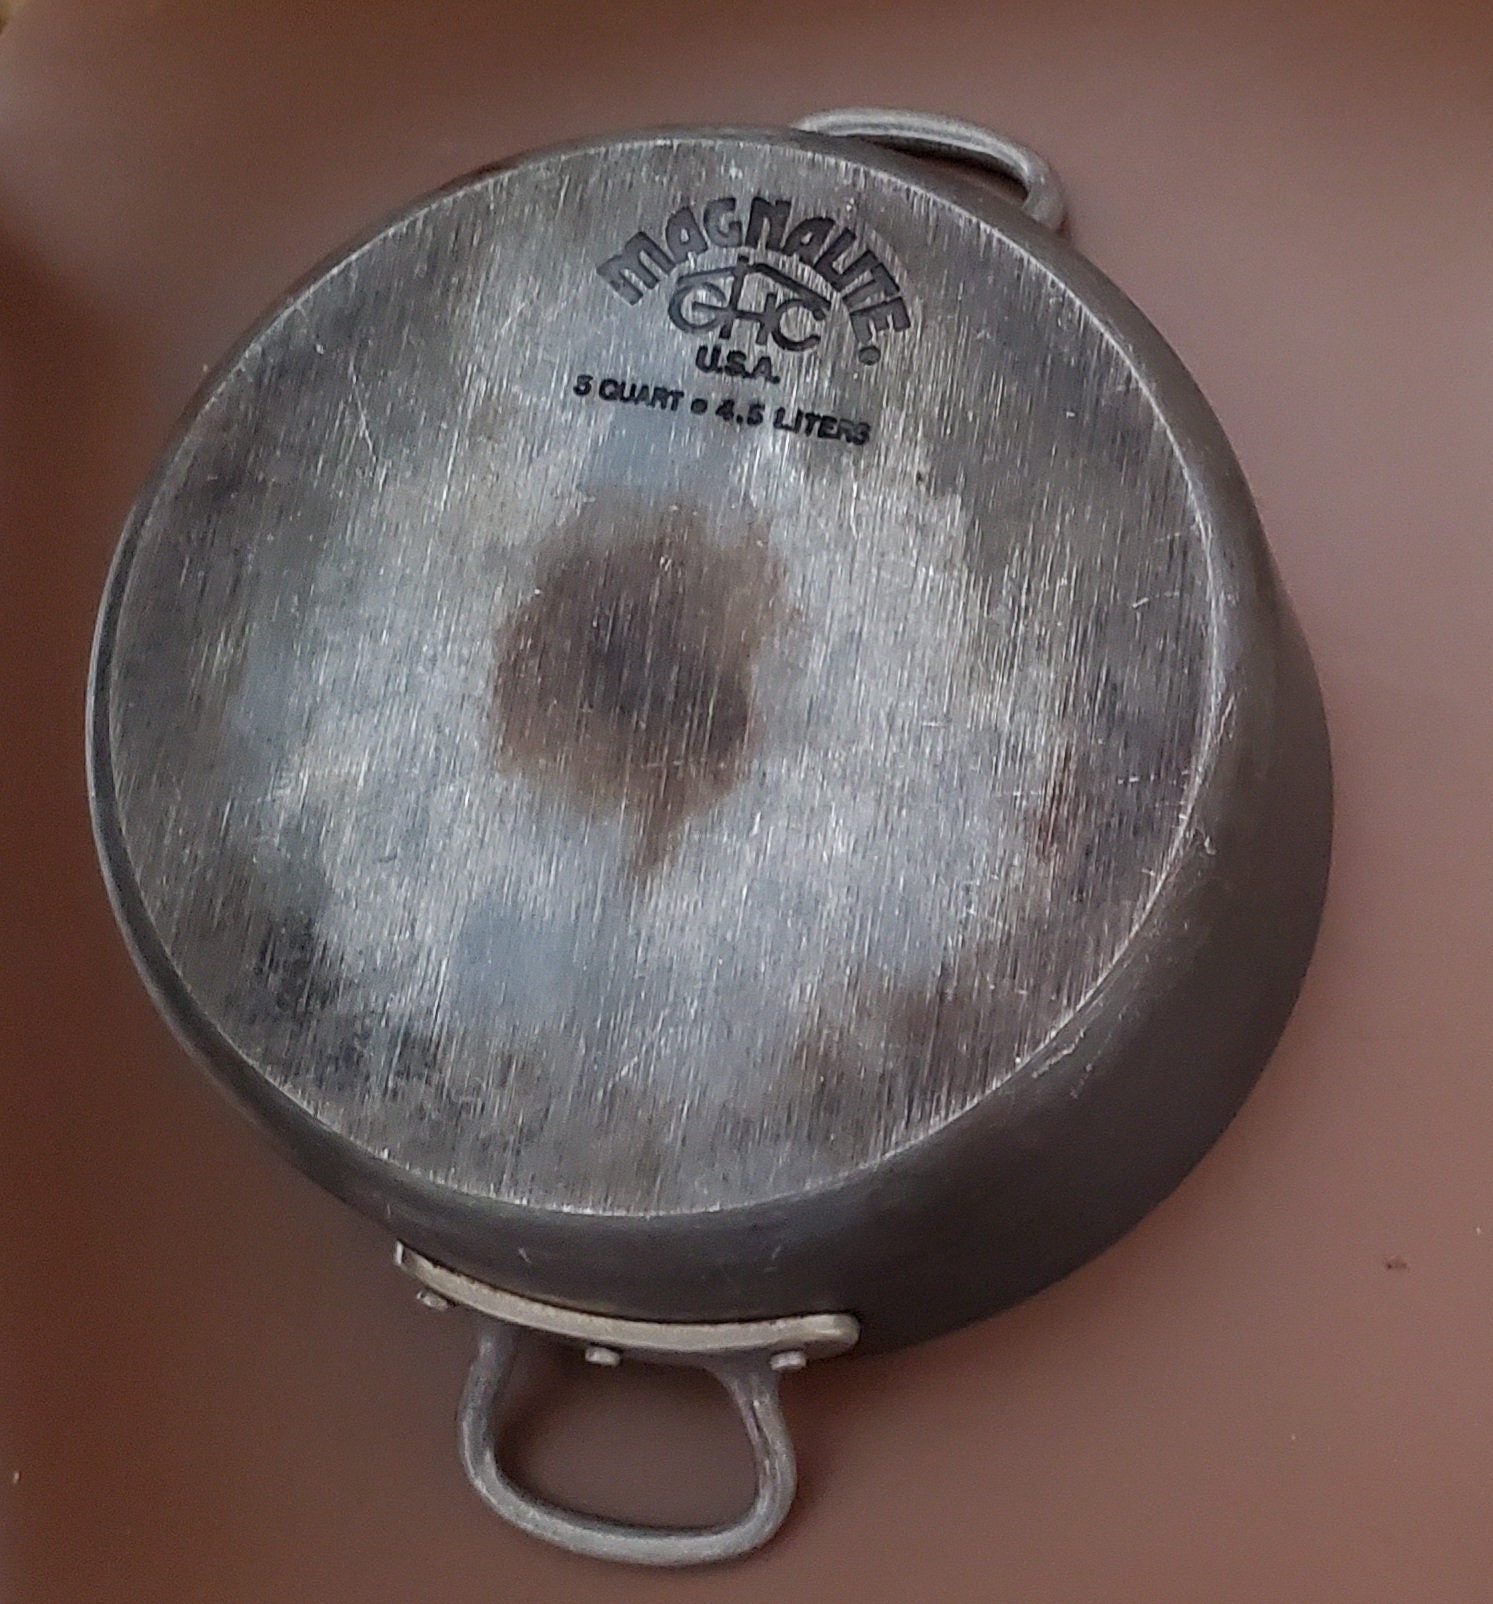 Magnalite GHC cooking pot Auctions